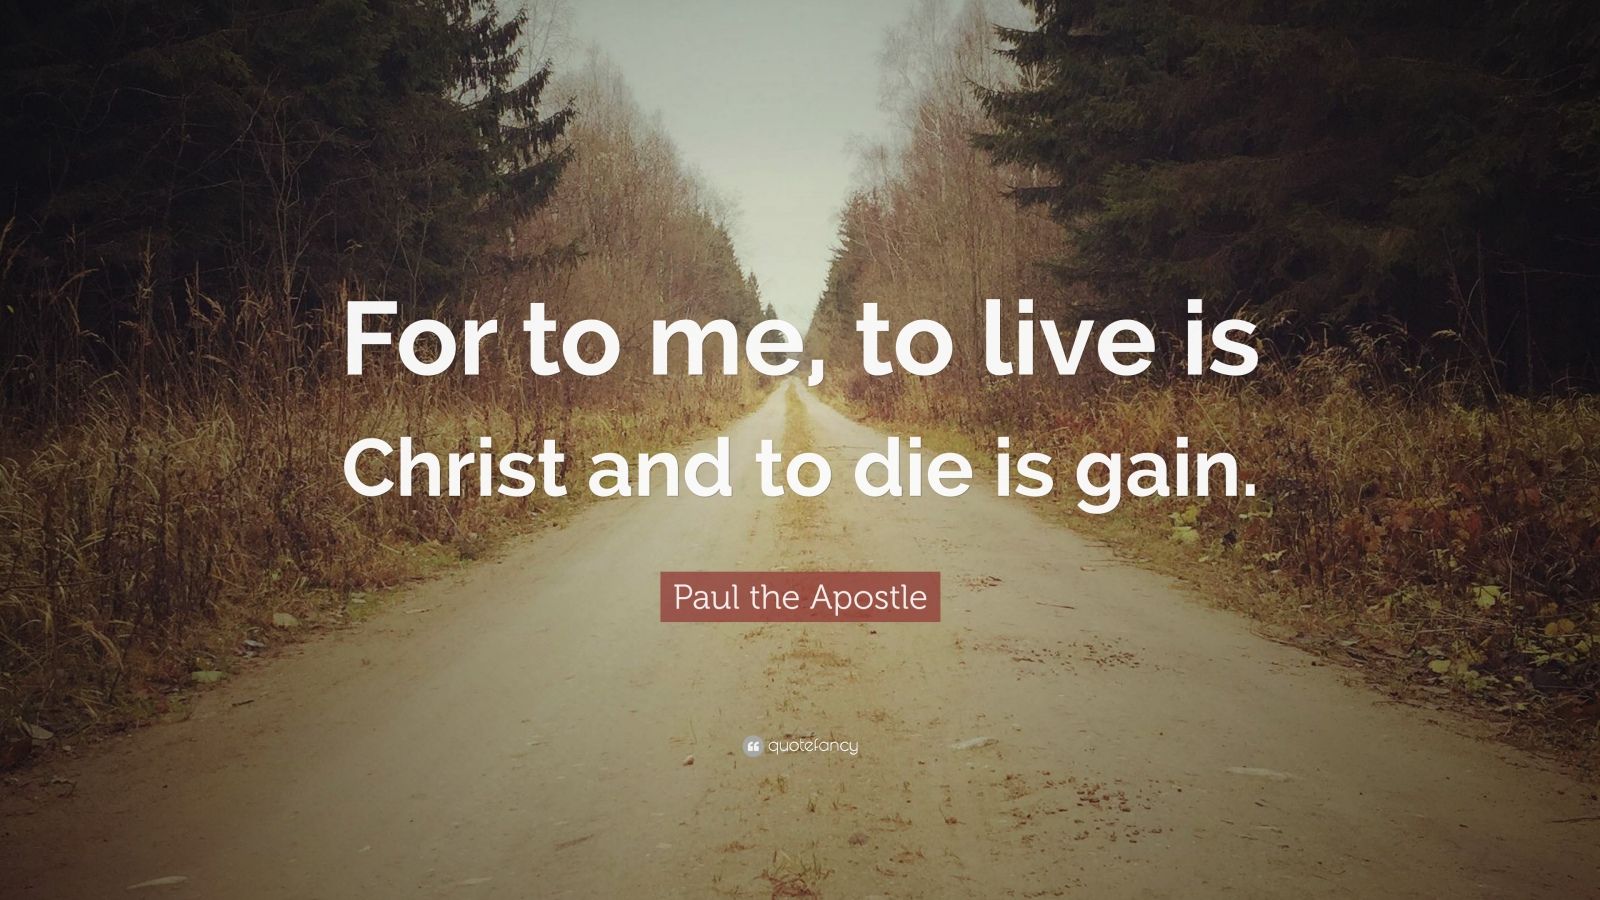 Paul the Apostle Quote: “For to me, to live is Christ and to die is gain.”